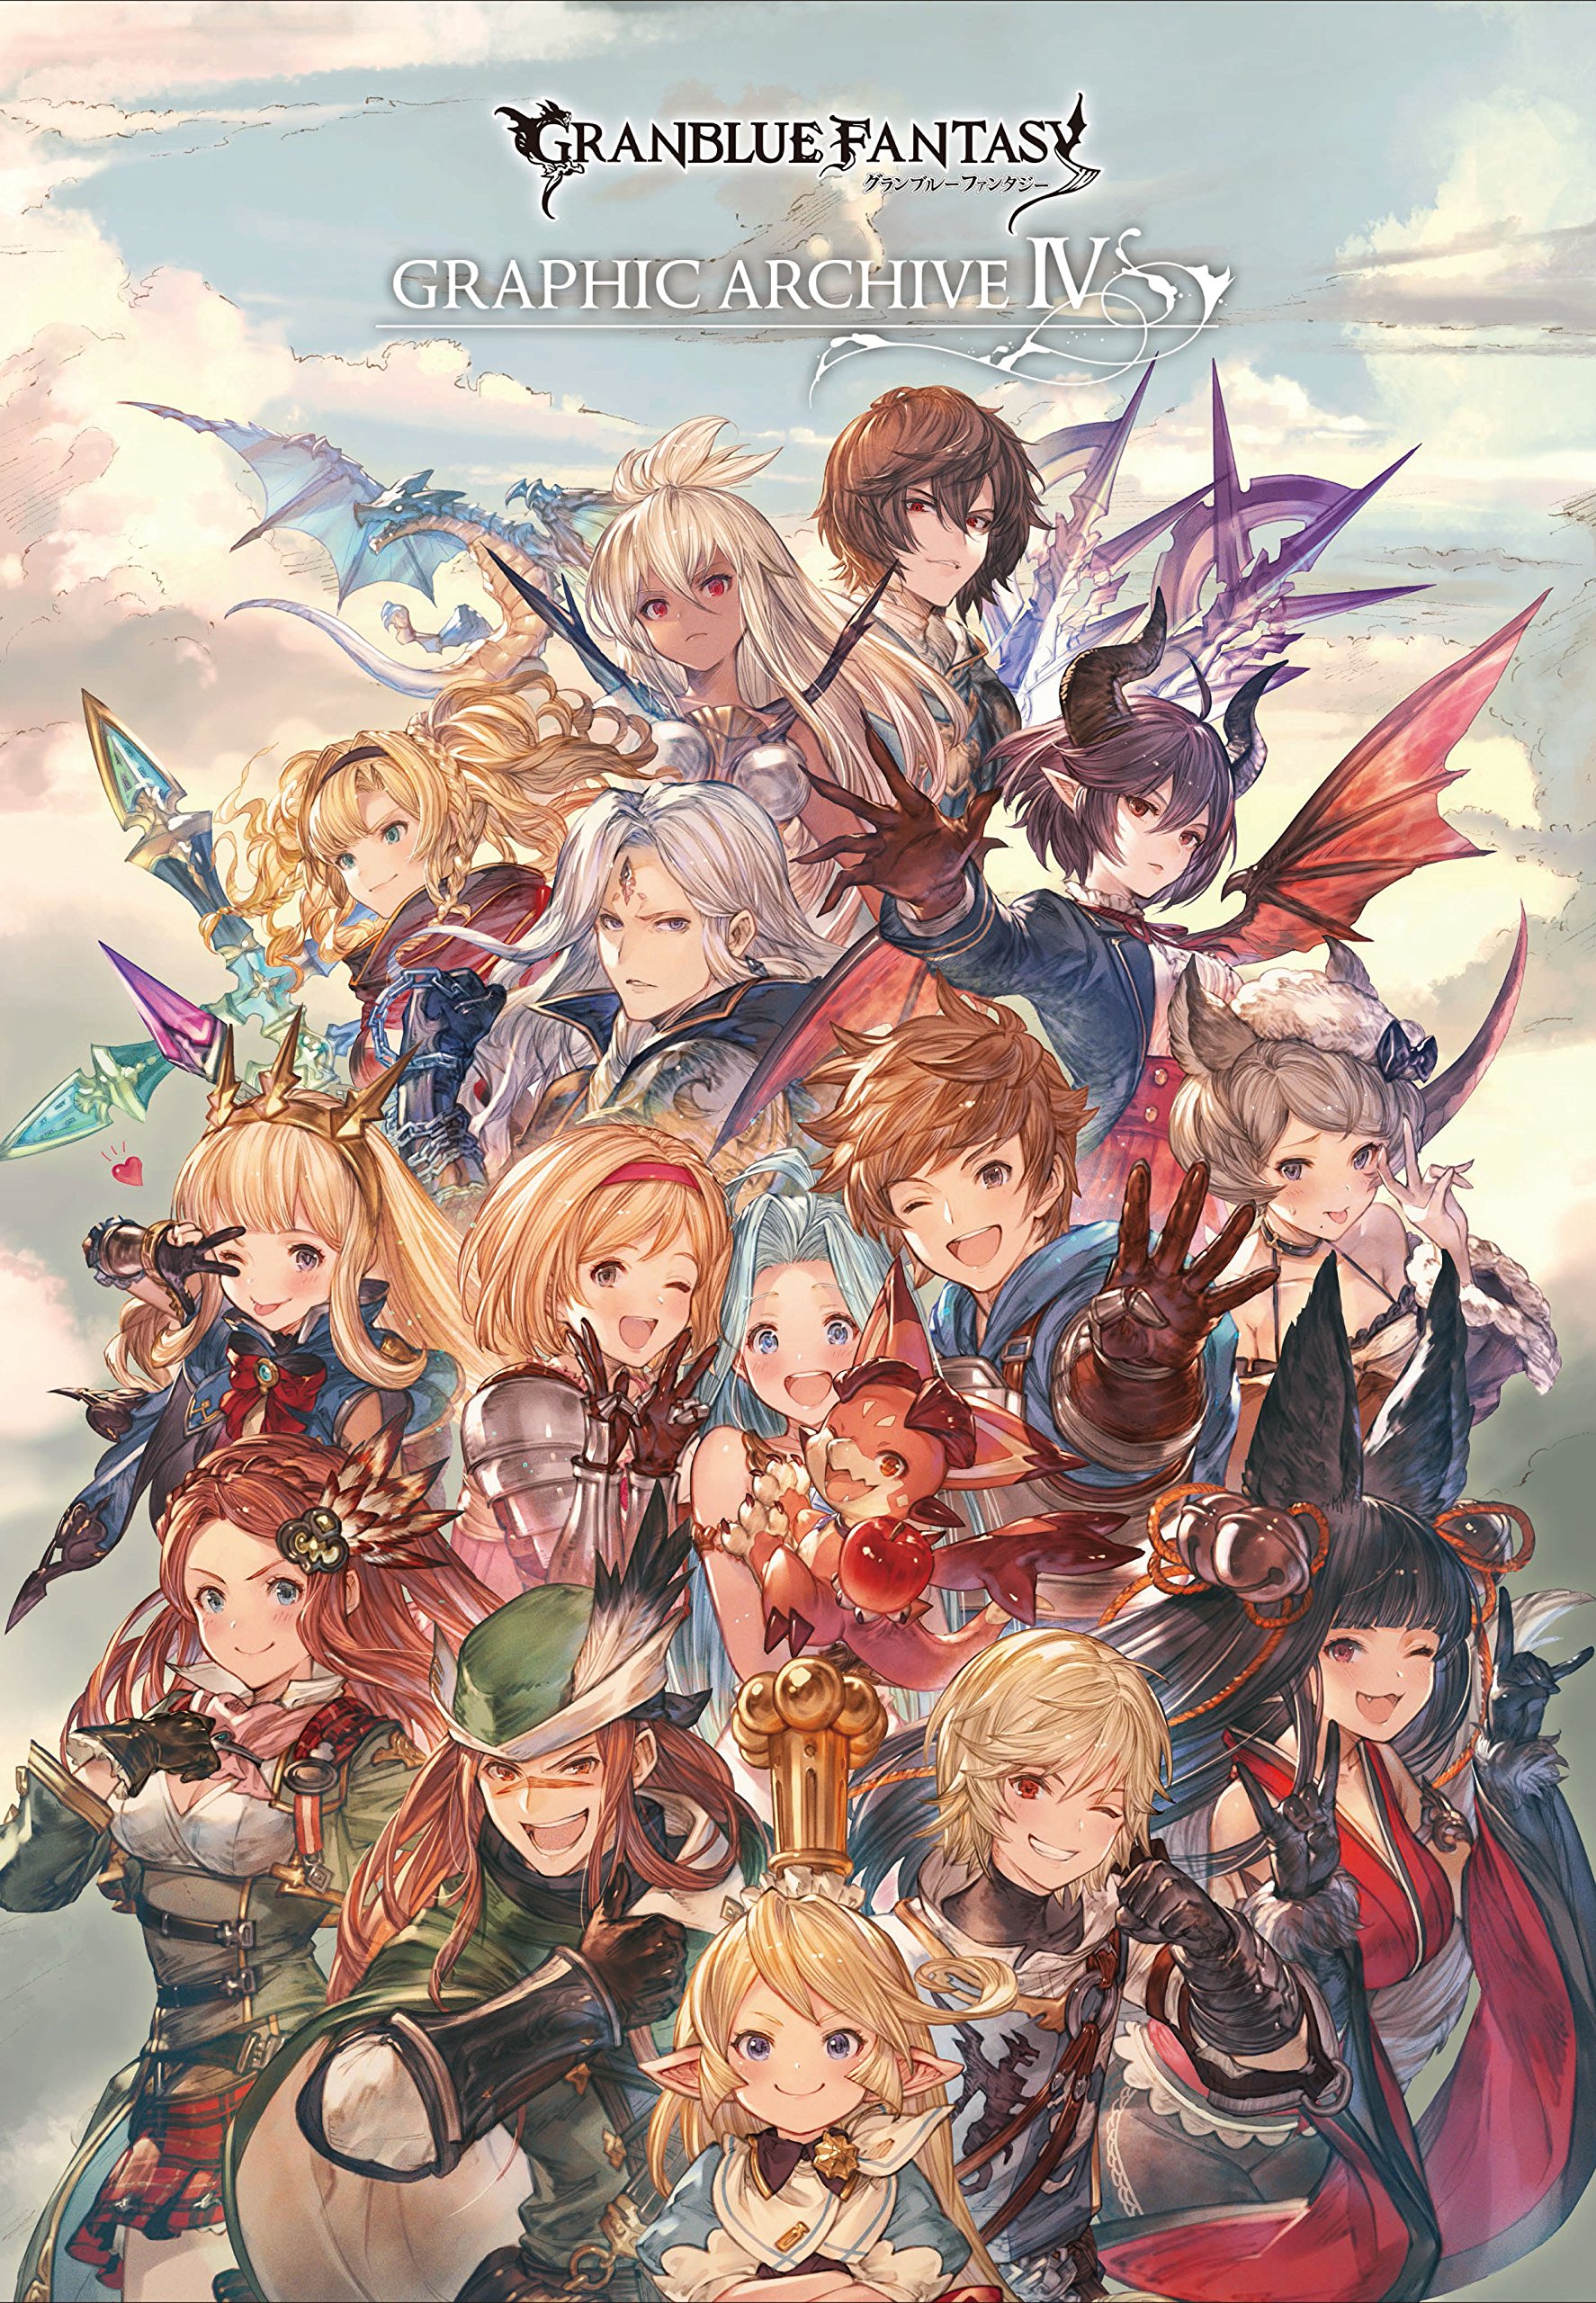 Noriyukiworks Granbluefantasy Gbf Info 4 Something Reminds Me A Lot Finalfantasy Of Course Because The Art Director Is Hideominaba Who Previously Collaborated On Various Series Like Finalfantasy5